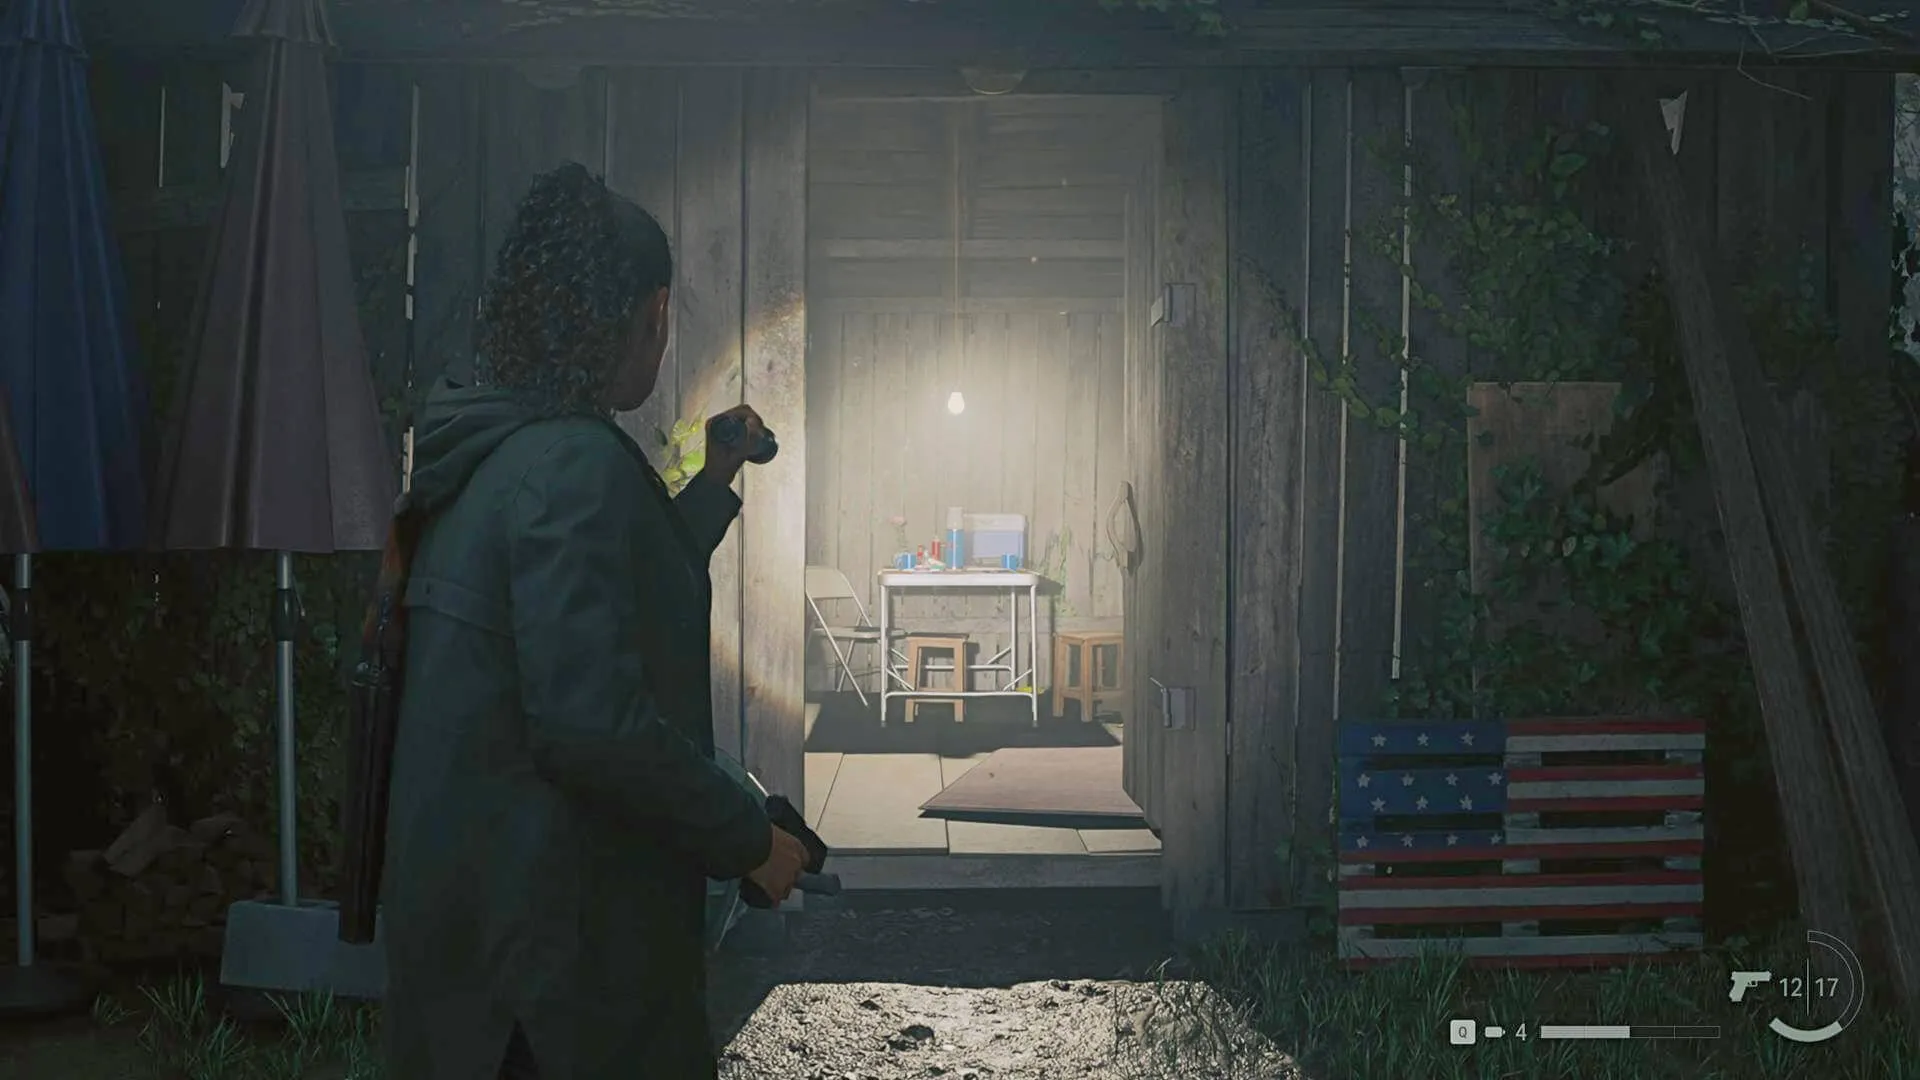 Alan Wake 2 New Game+ Mode Coming After Launch; Here's What to